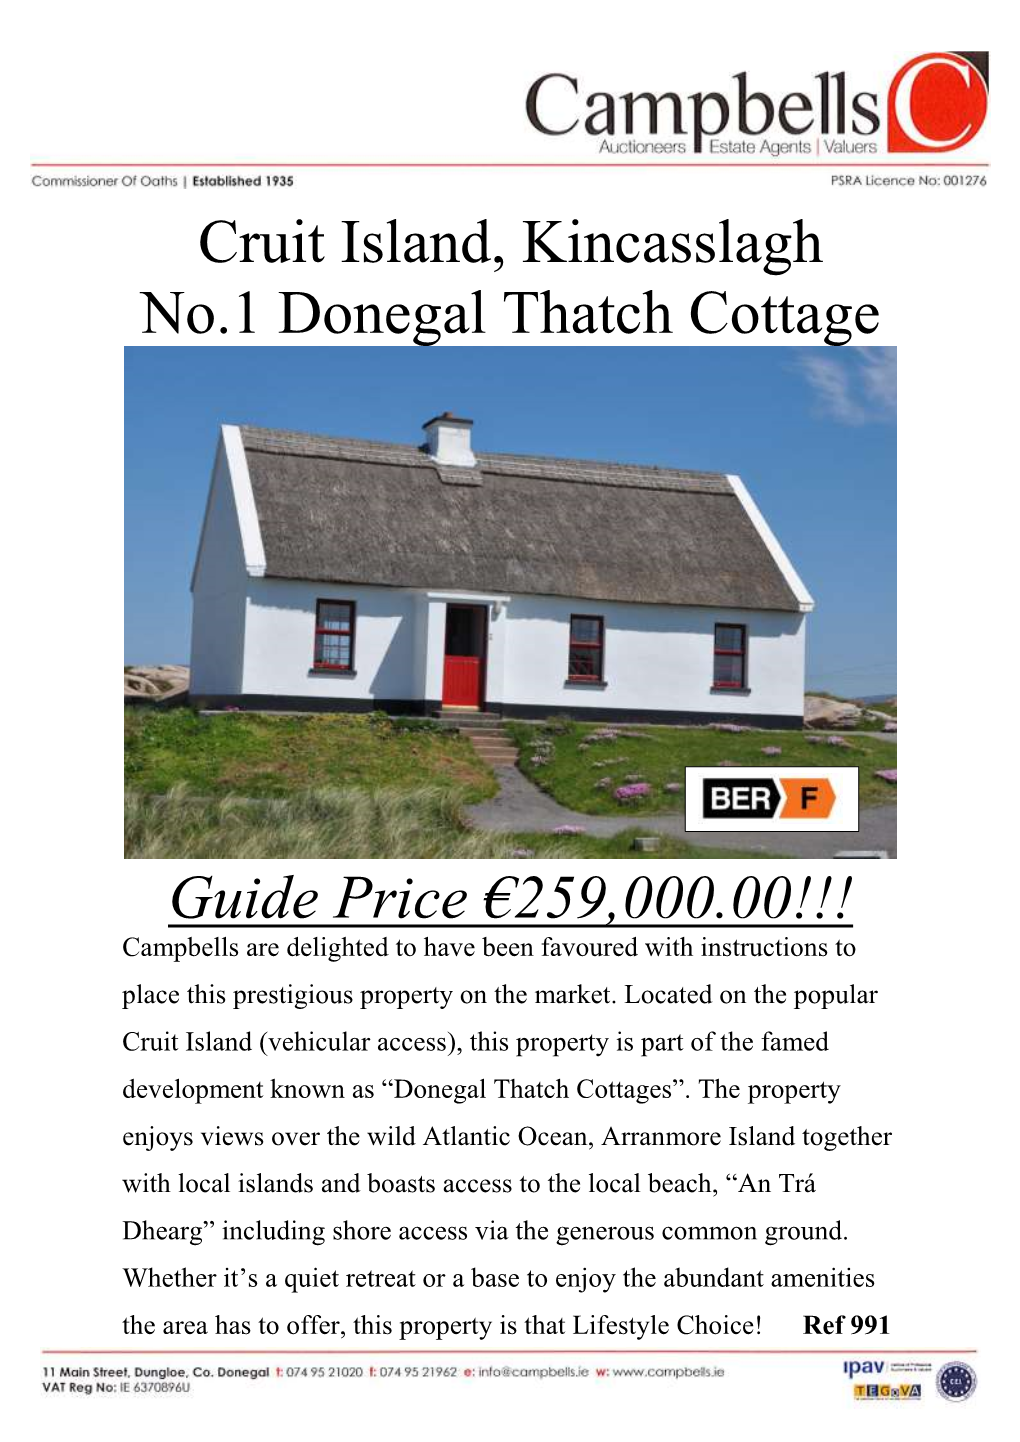 Cruit Island, Kincasslagh No.1 Donegal Thatch Cottage Guide